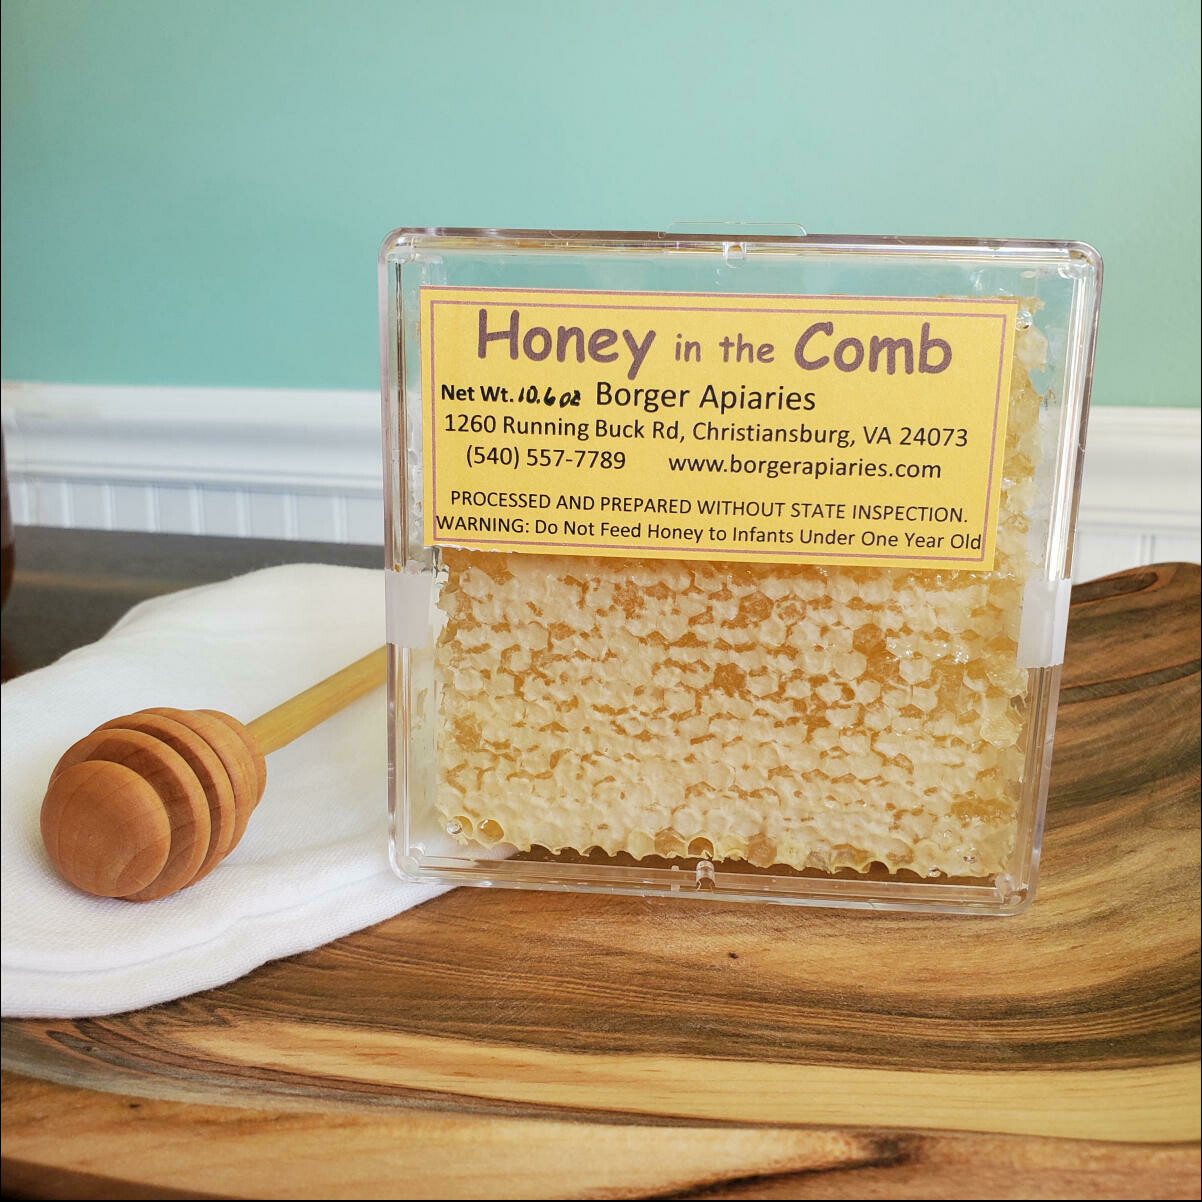 Borger Apiaries Honey in the Comb